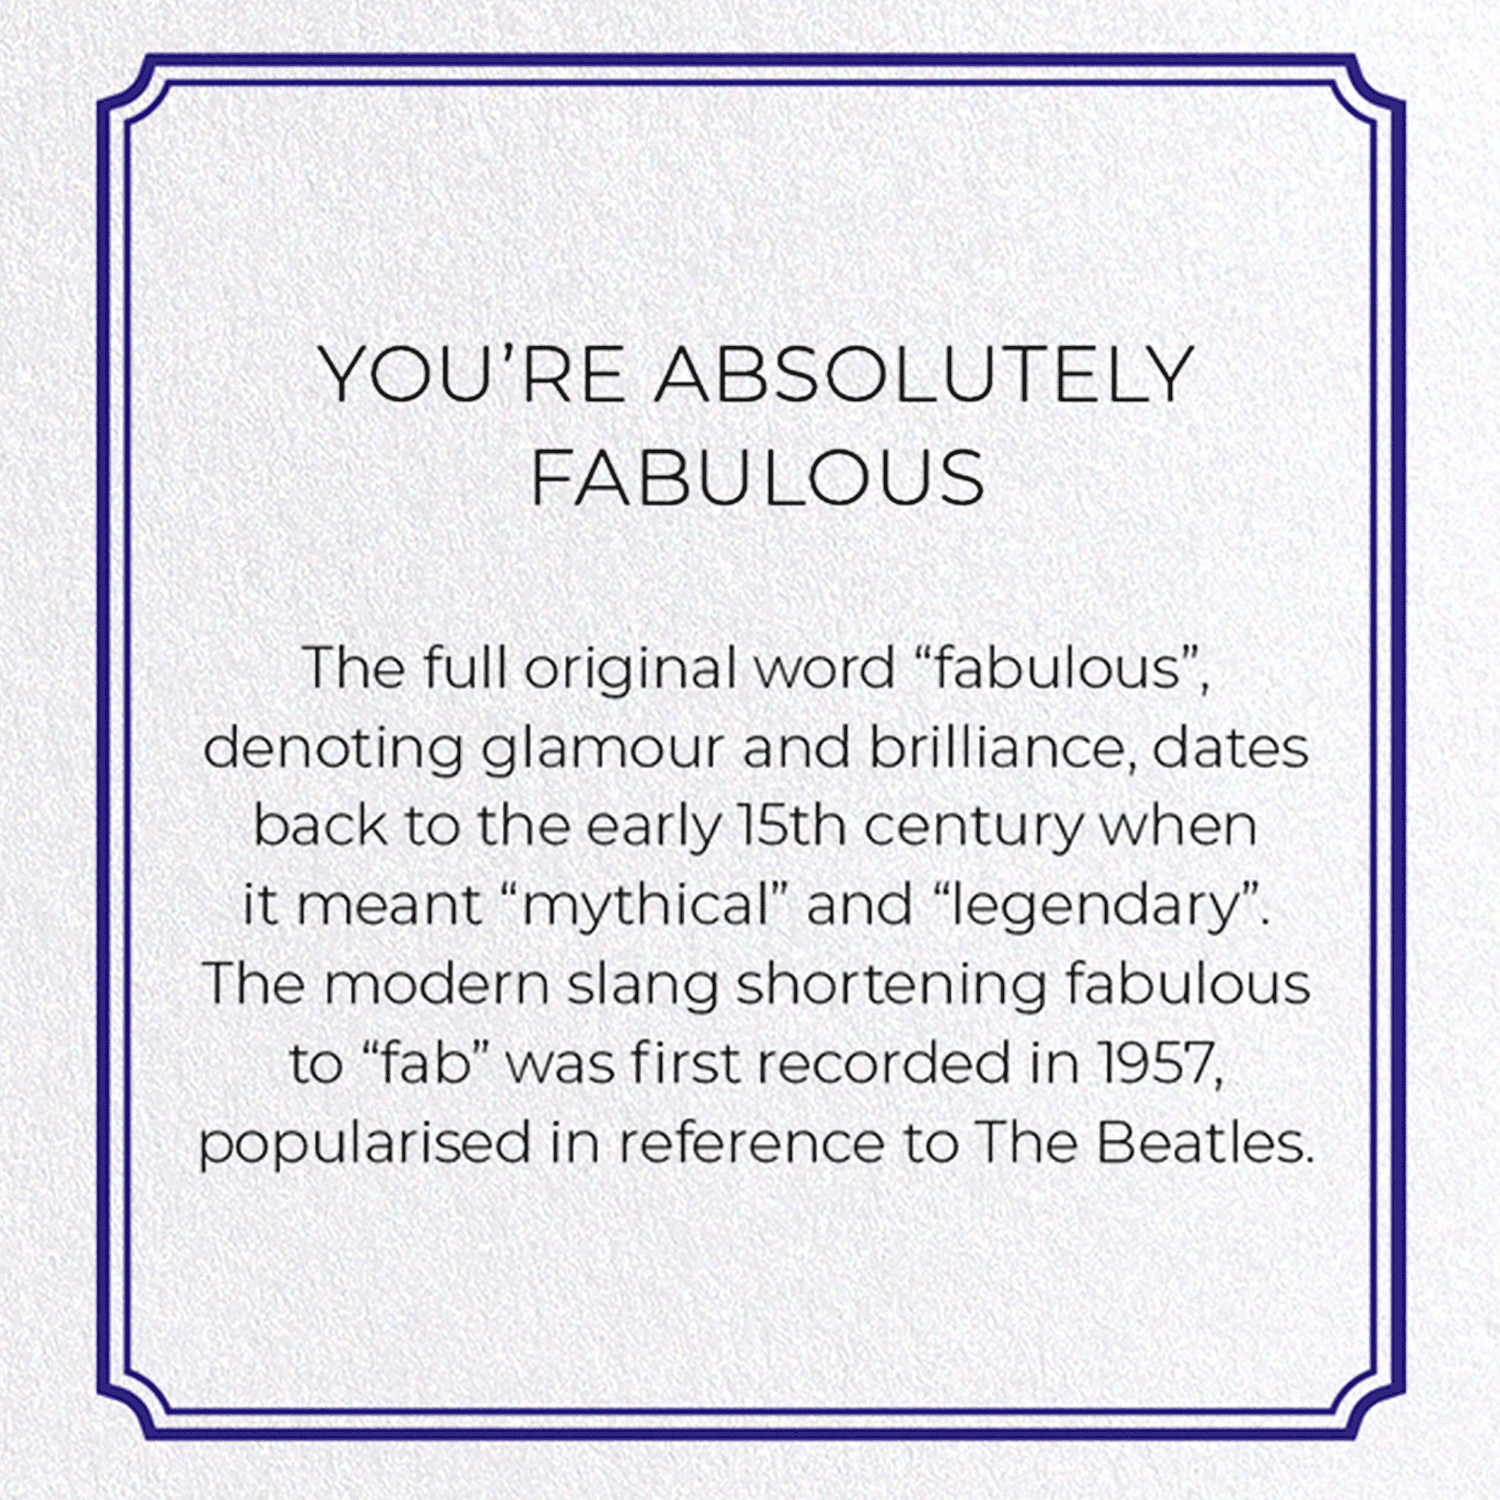 YOU’RE ABSOLUTELY FABULOUS: Vintage Greeting Card